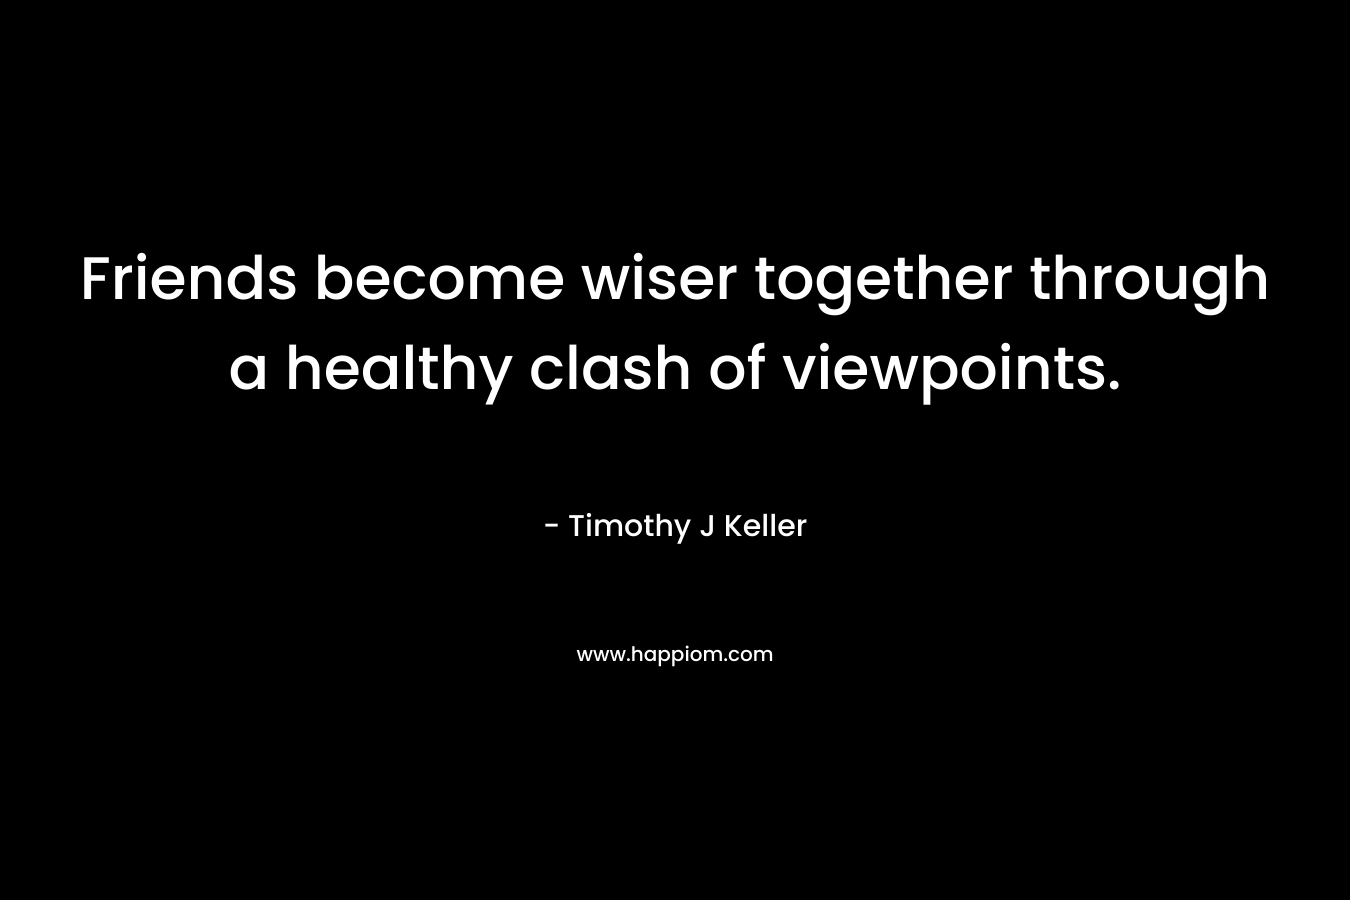 Friends become wiser together through a healthy clash of viewpoints.